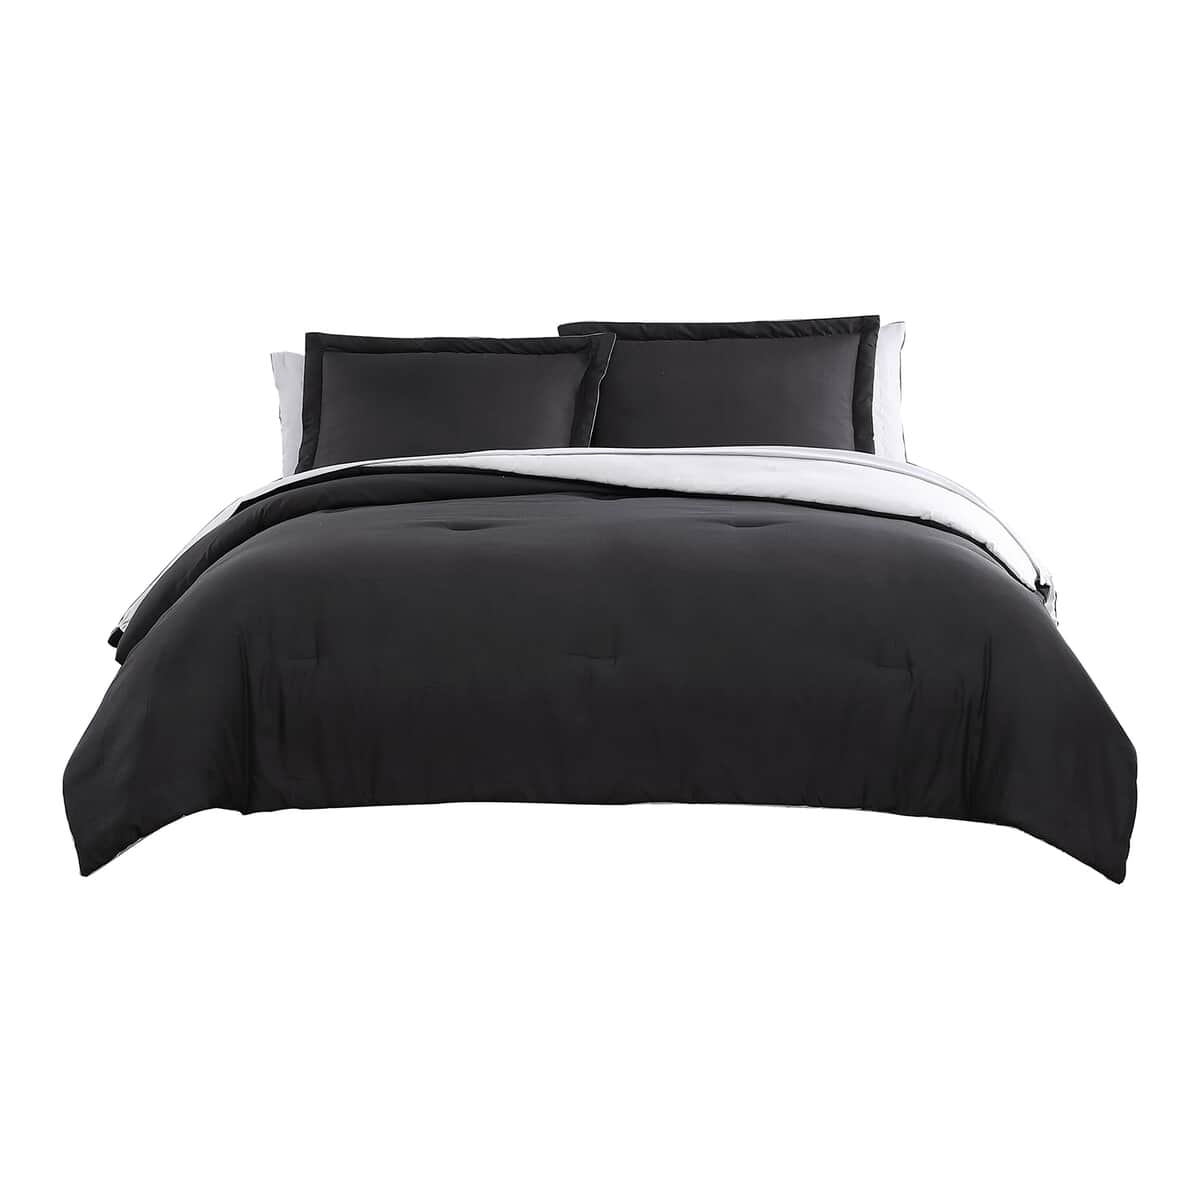 The Nesting Company- Chestnut Reversible 7 Piece bed in a bag Comforter Set Queen Black & Gray image number 3